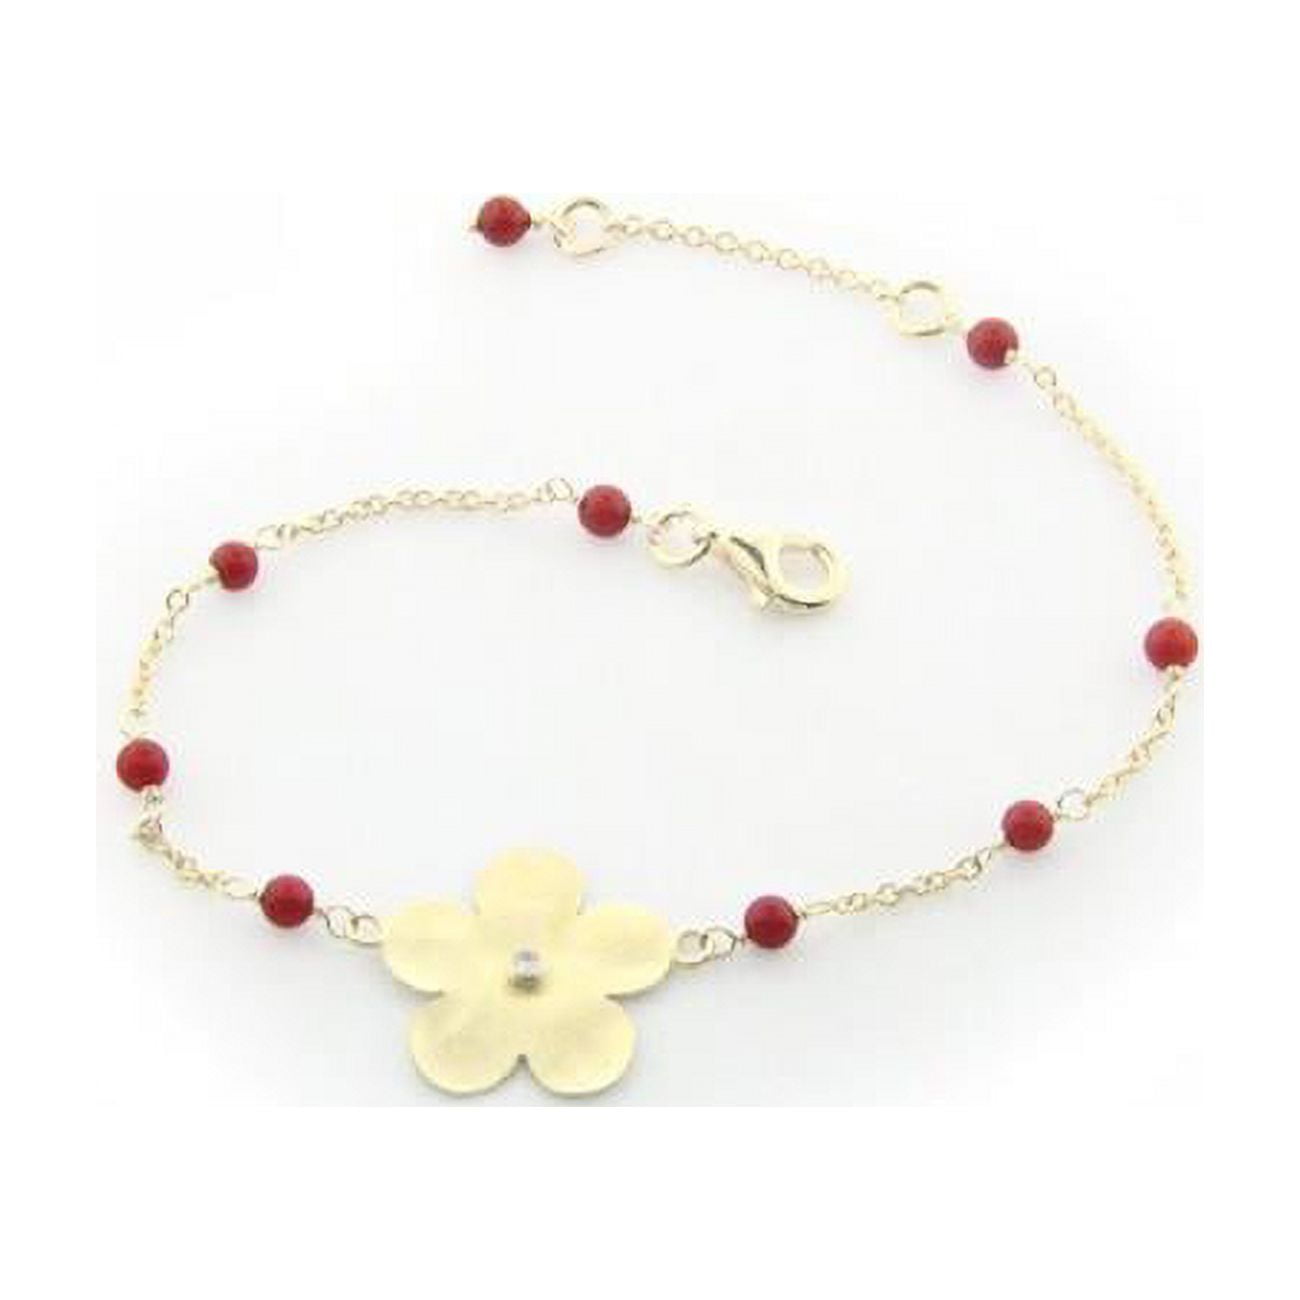 2b2216c 6 In. Hammered Gold Plated Sterling Silver Flower Of Life & Coral Beads Chain Bracelet For Girls